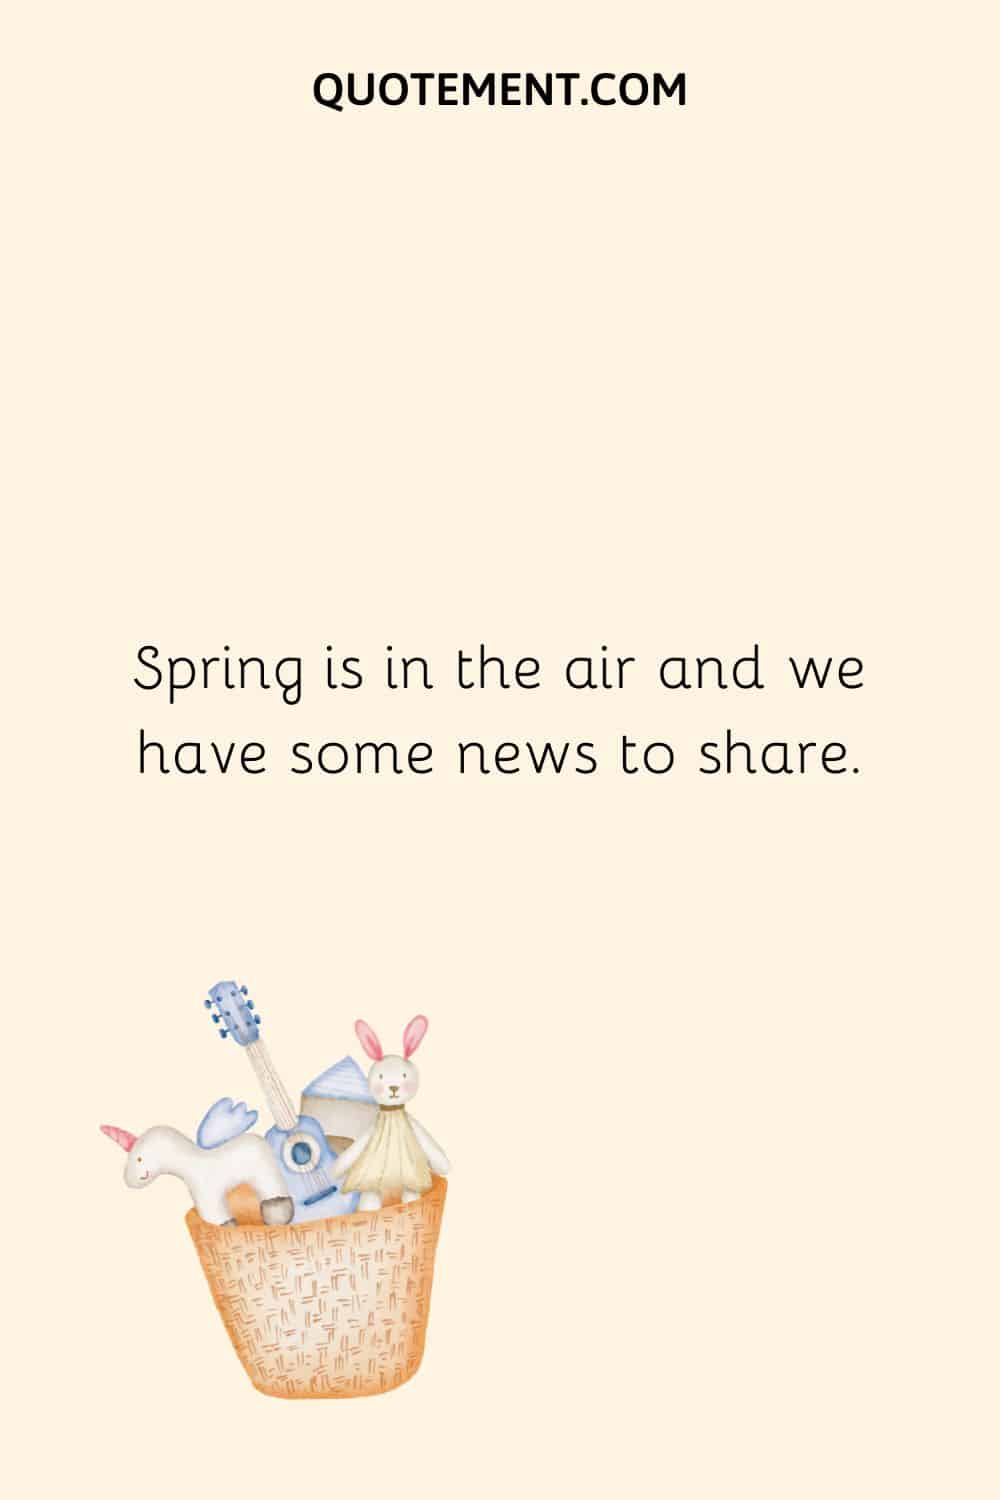 Spring is in the air and we have some news to share